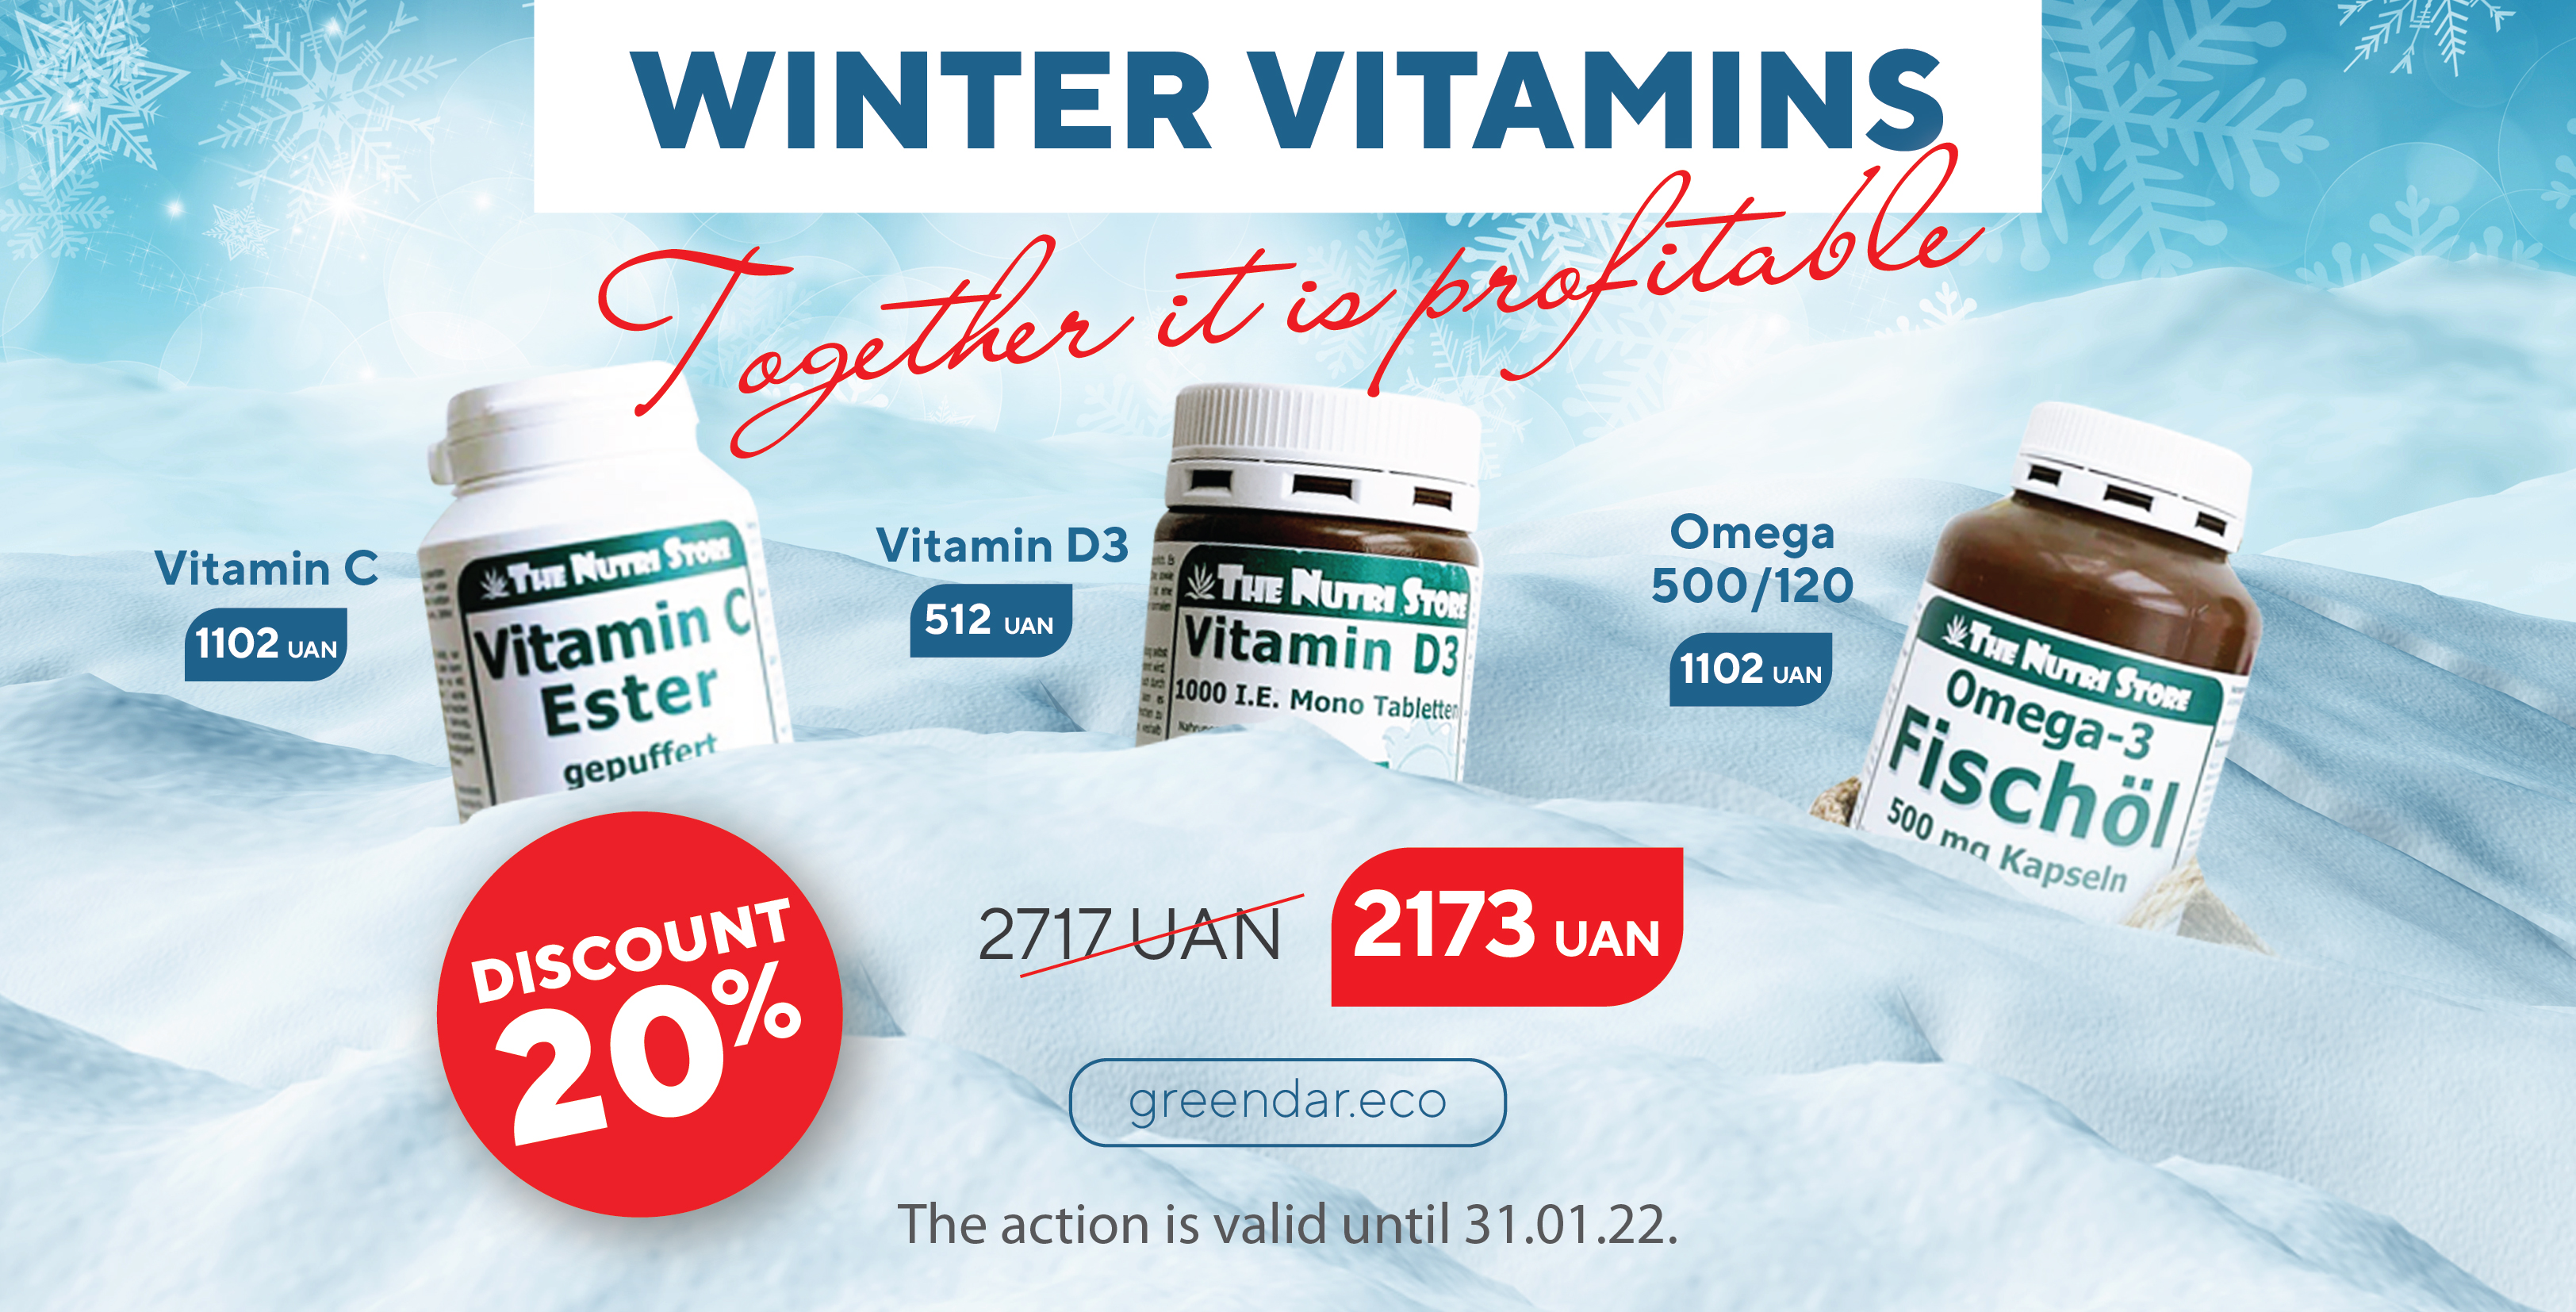 Boxing "Winter vitamins" | Greendar - We care about life and health